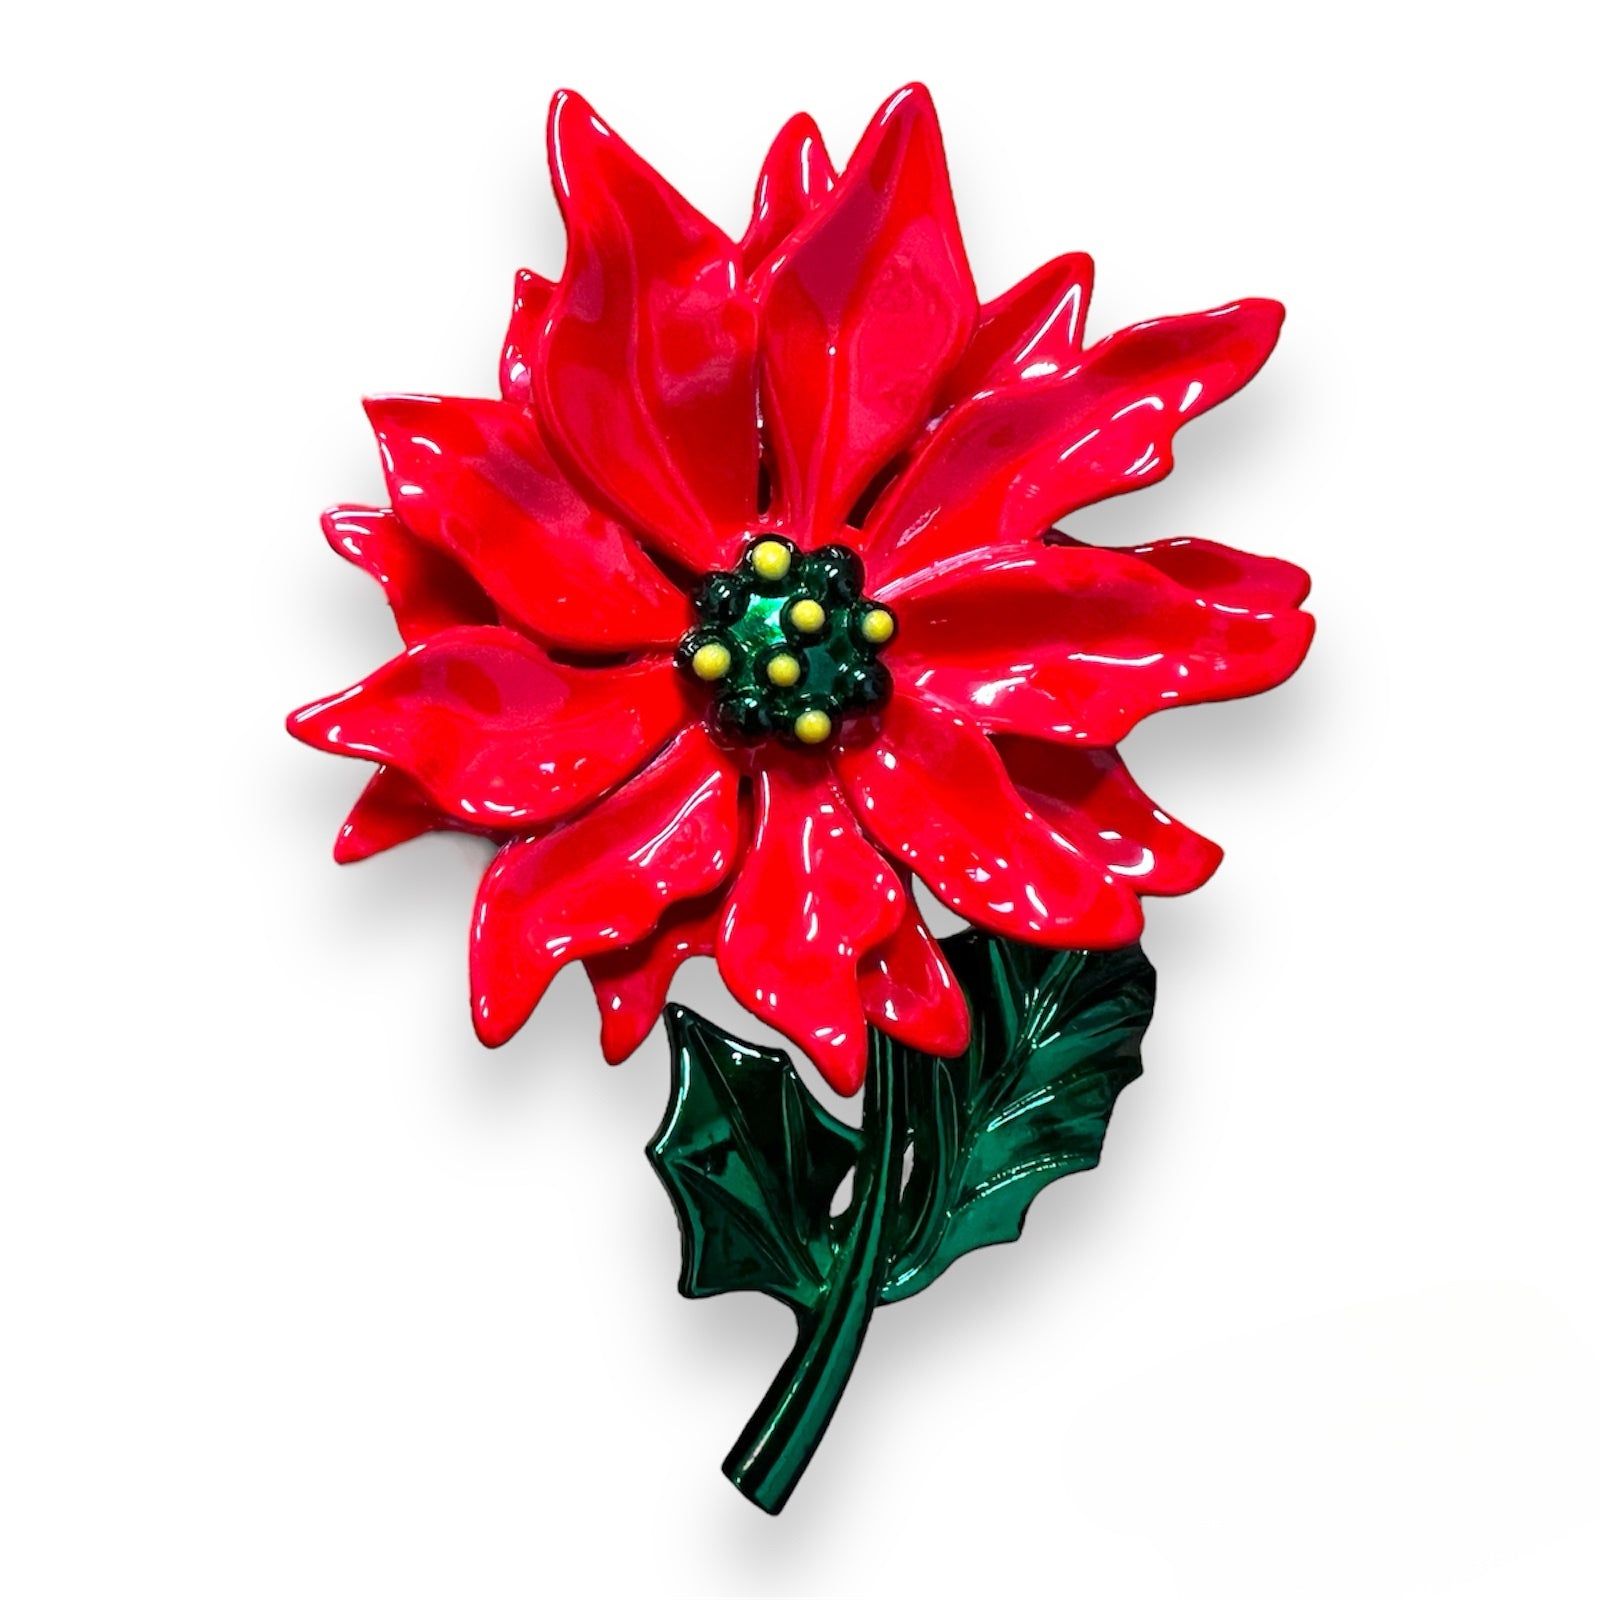 Bright red and metallic green enameled poinsettia brooch